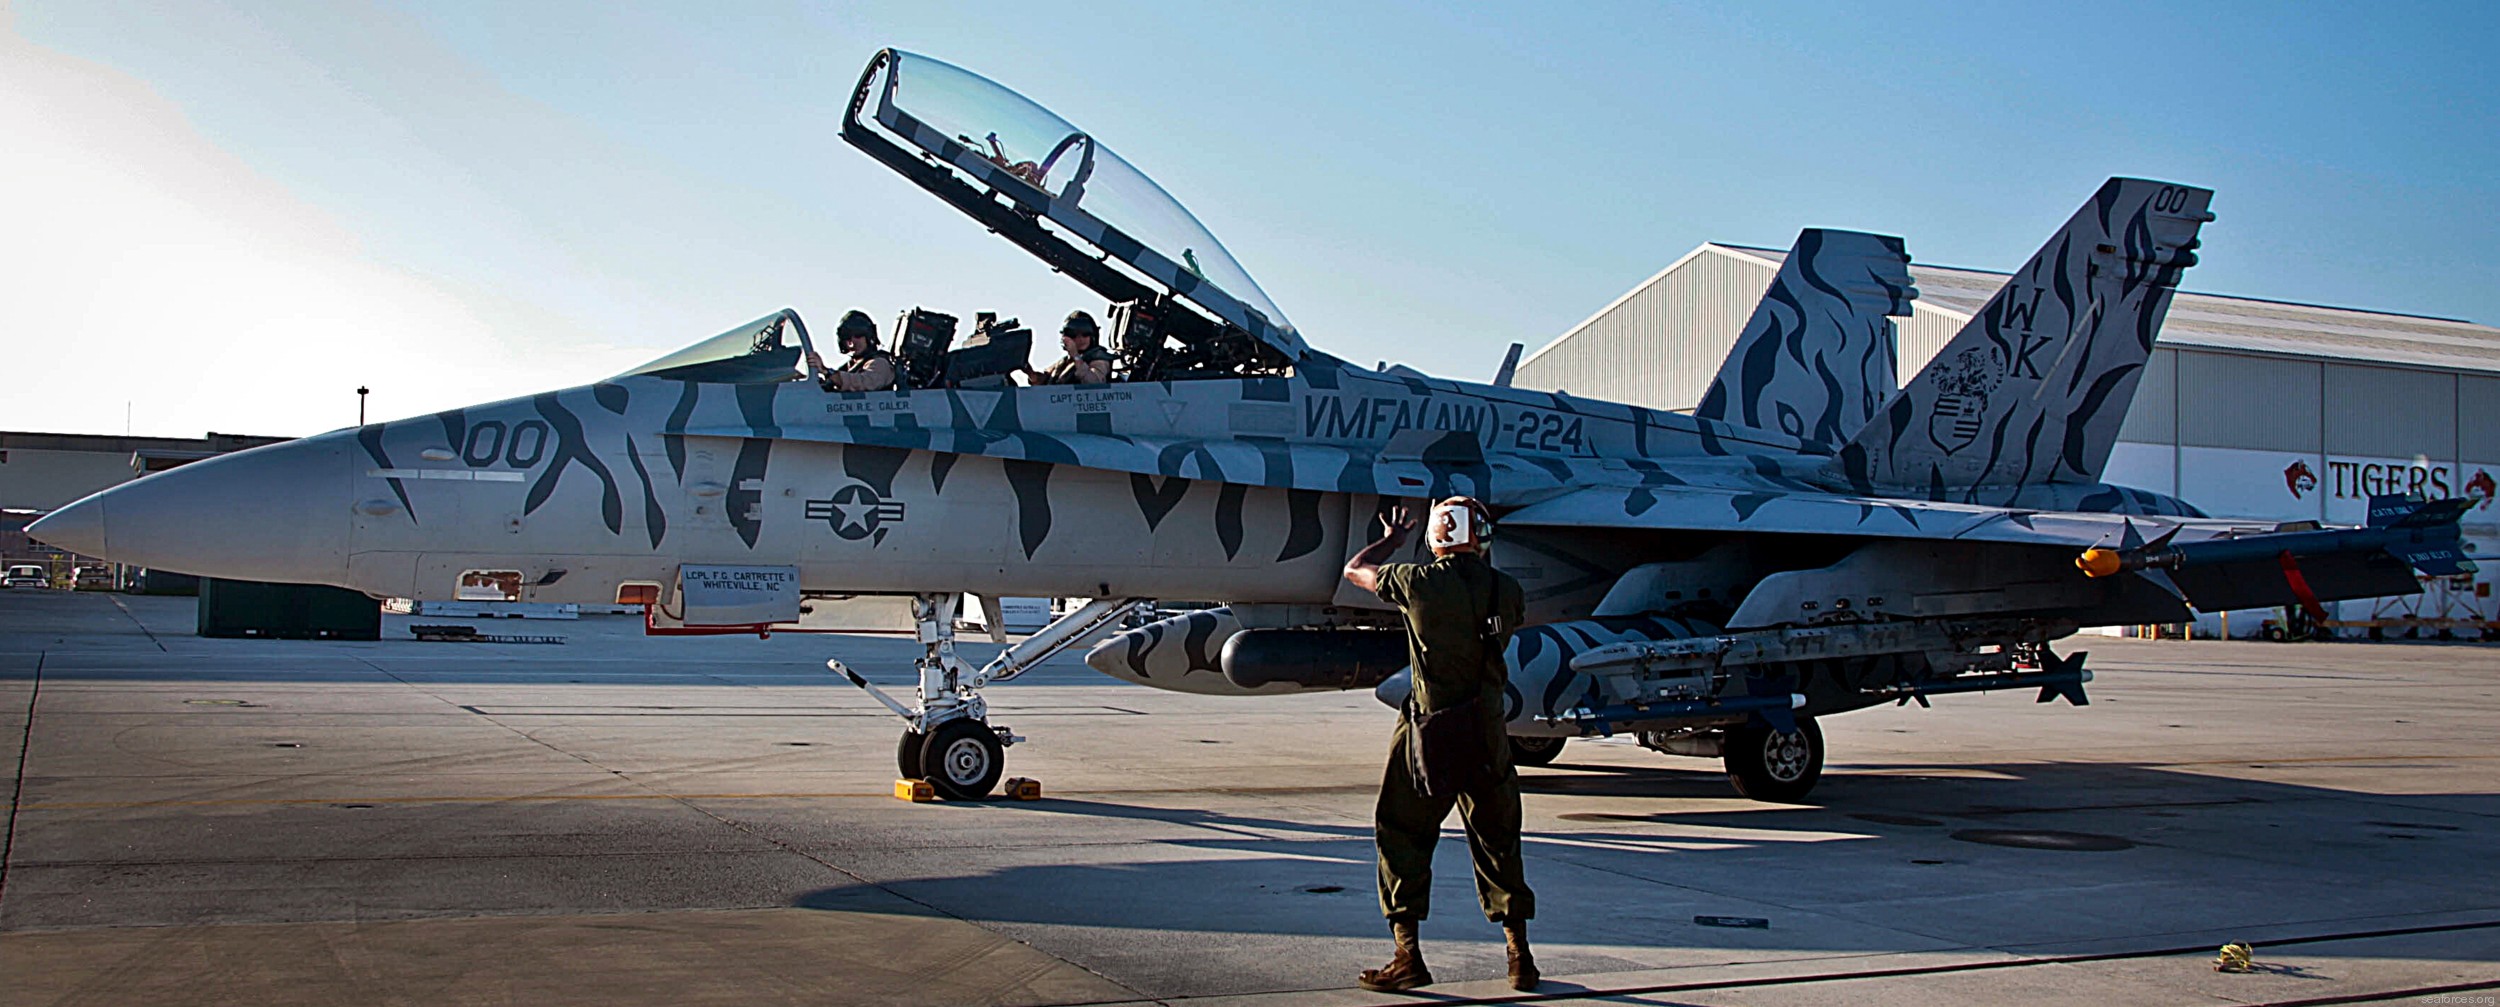 vmfa(aw)-224 bengals marine fighter attack squadron usmc f/a-18d hornet 10 mcas cherry point